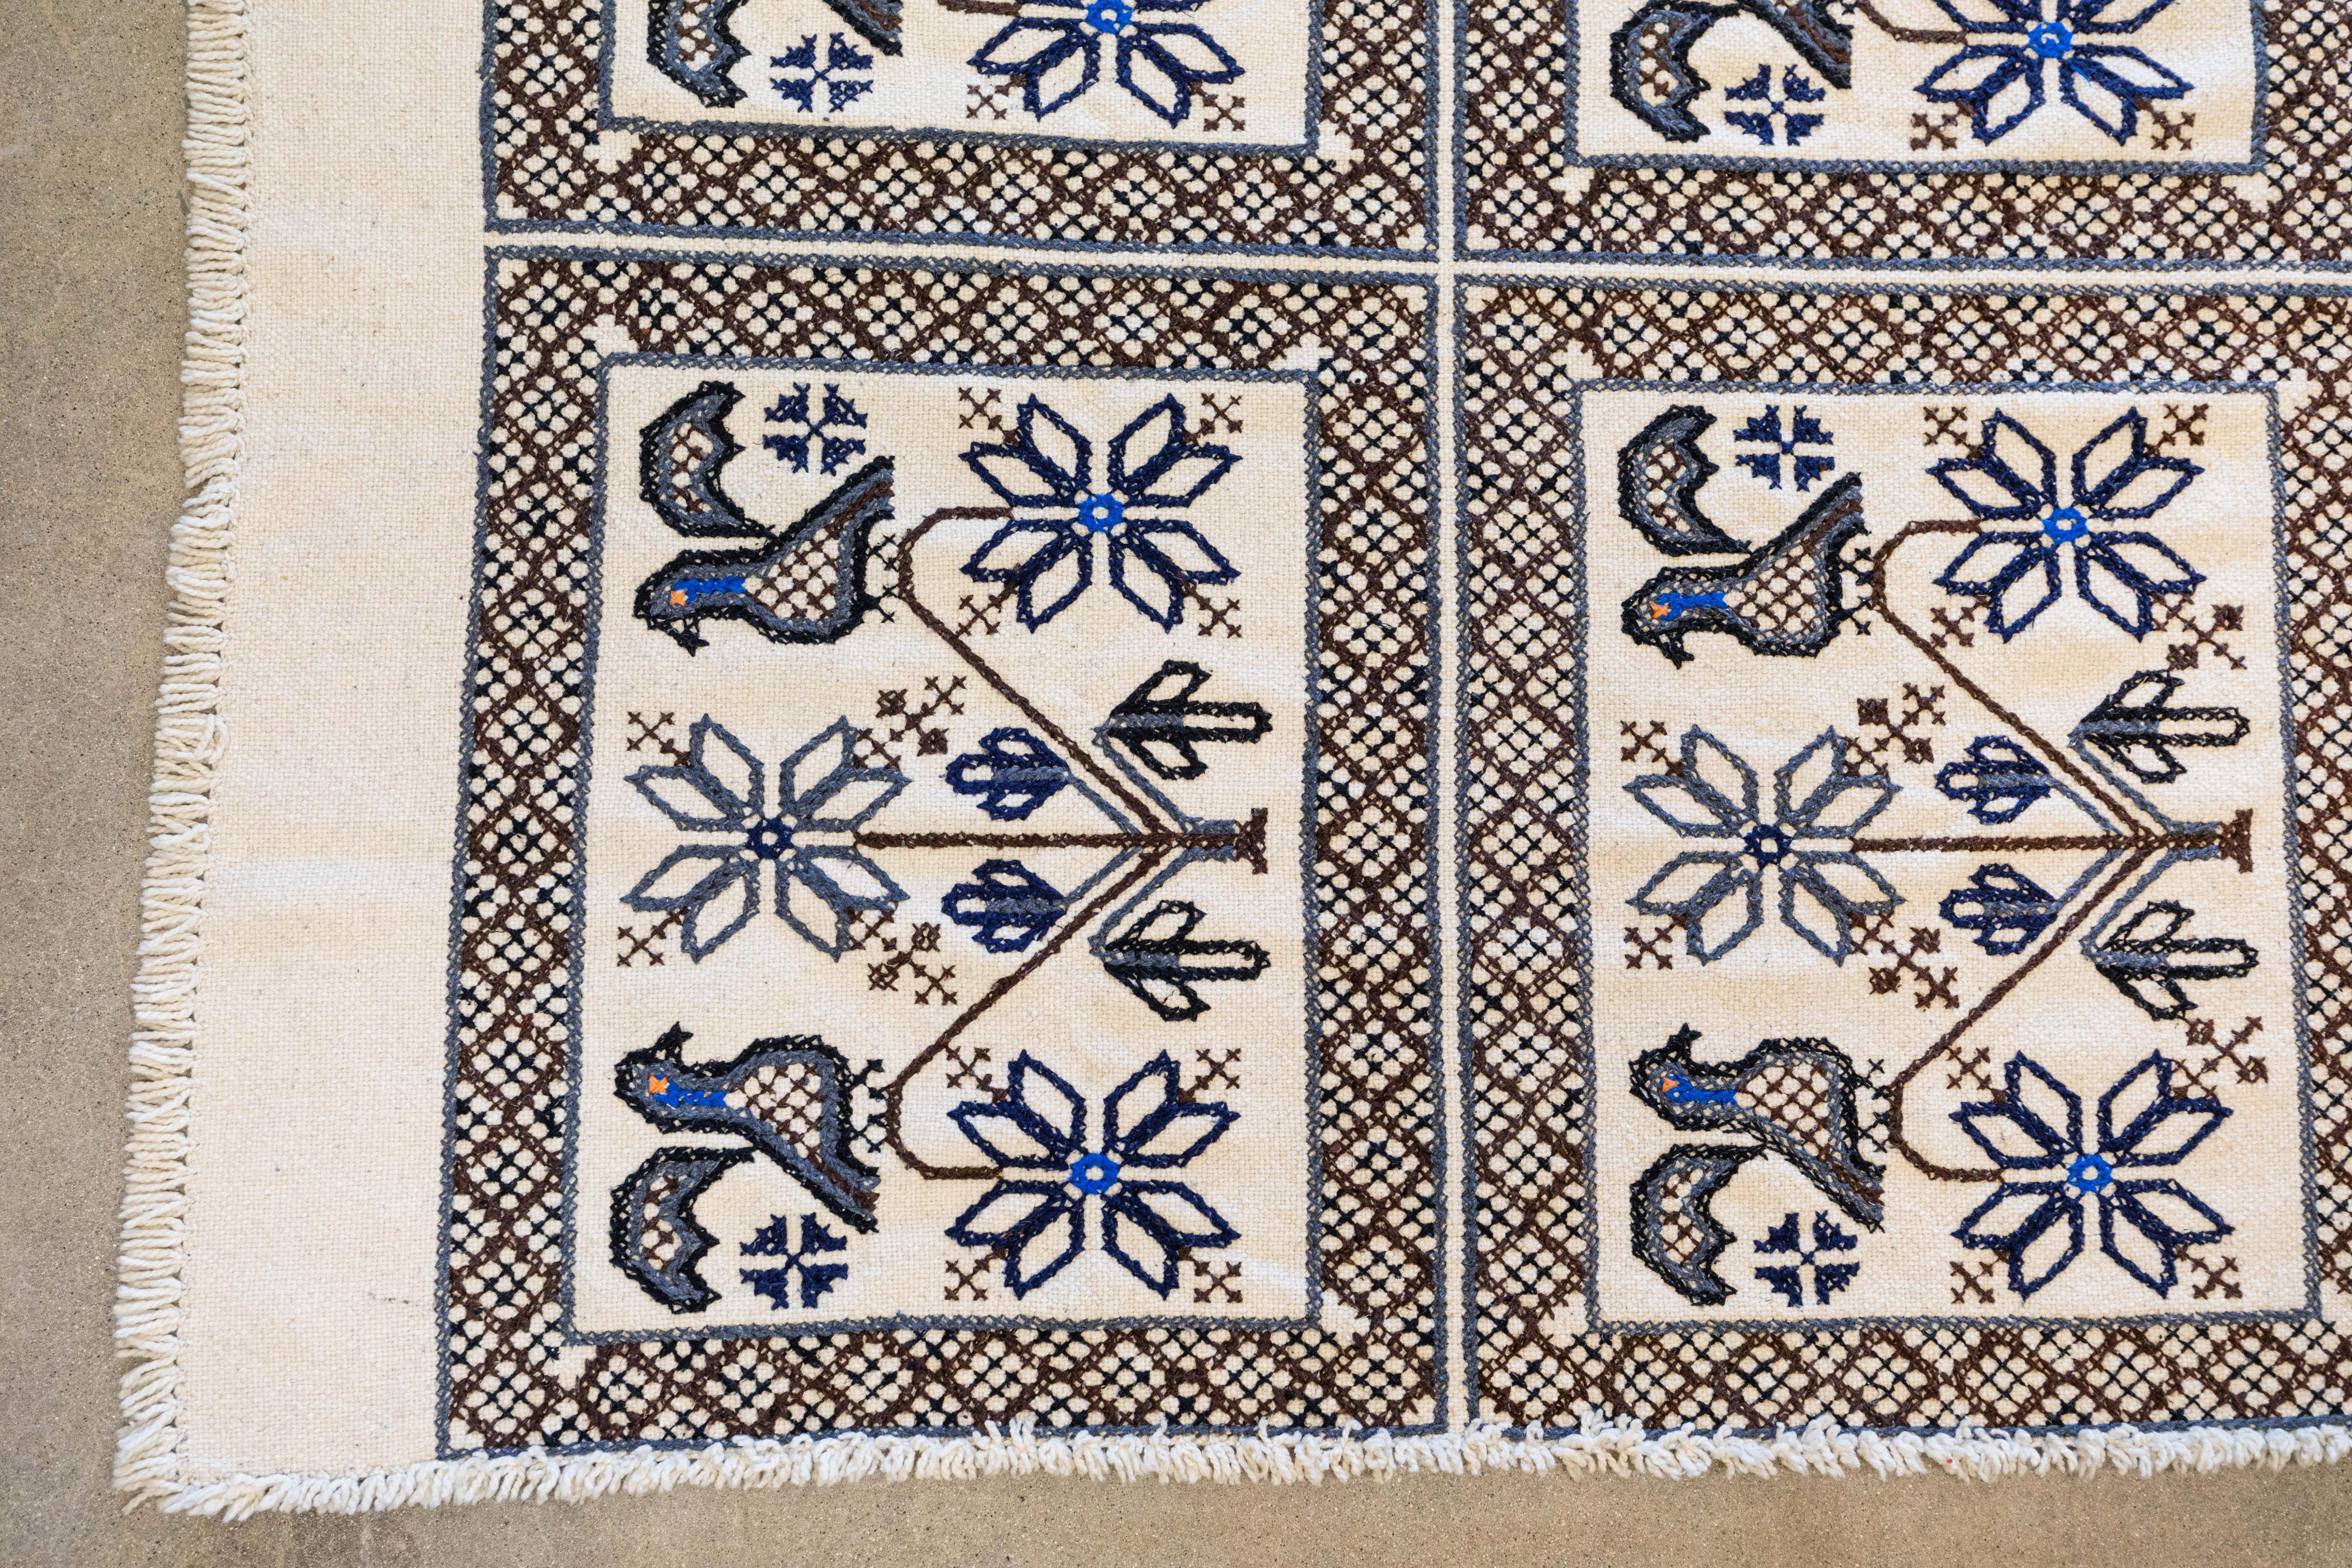 Folk Art Large 1950s Vintage Mexican Textile with Geometric Cross Stitch Design and Birds